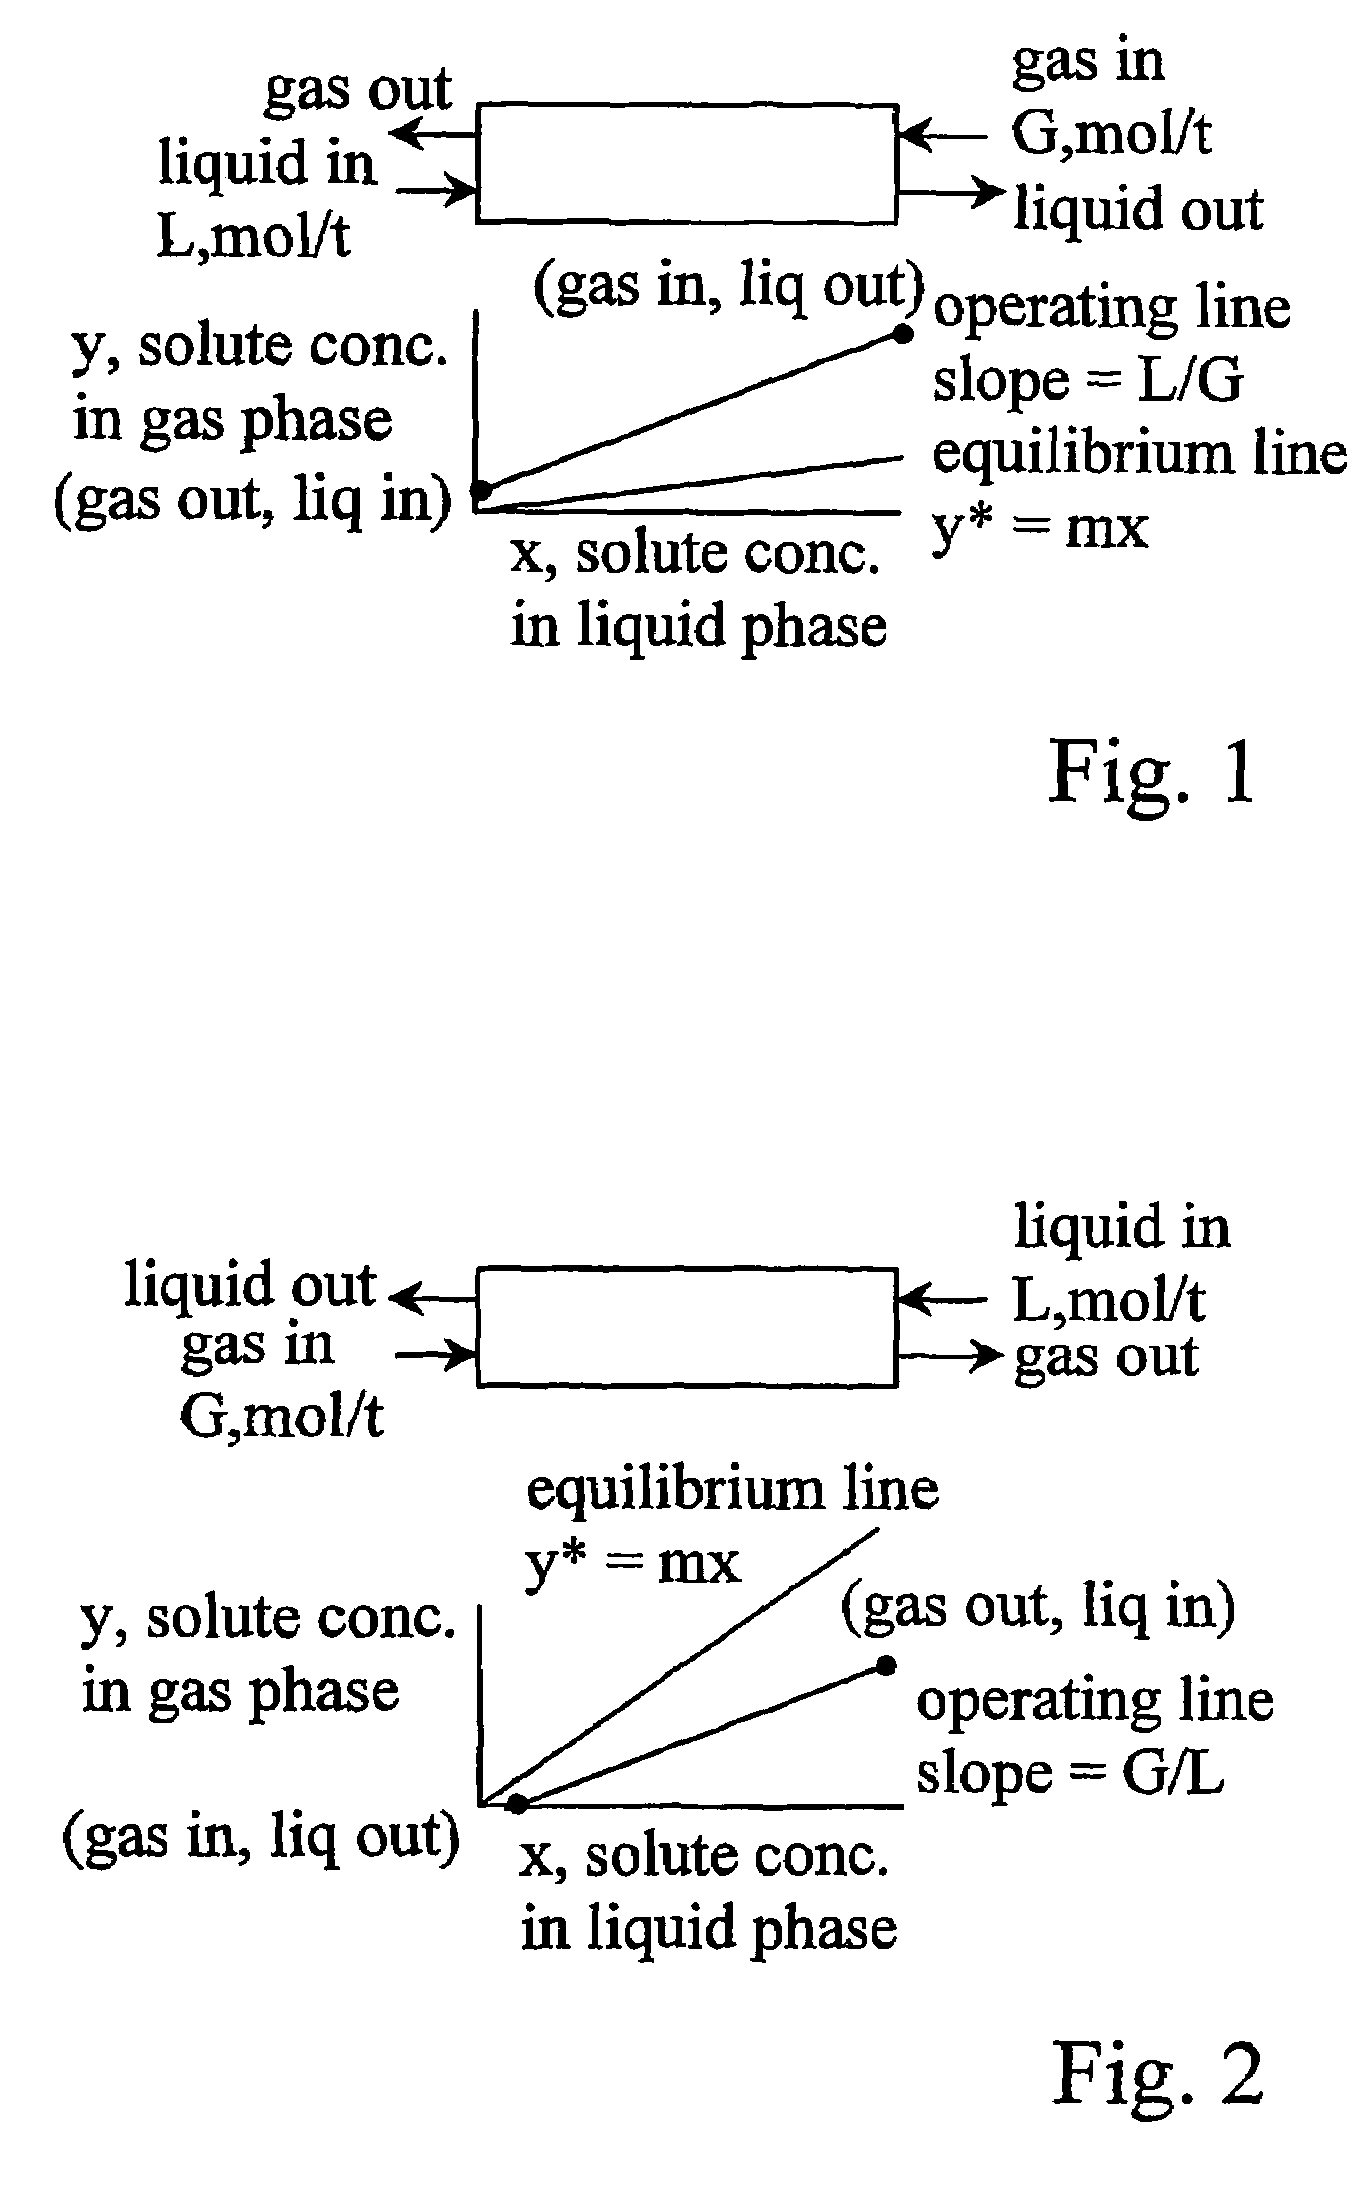 Controlled atmosphere gas infusion